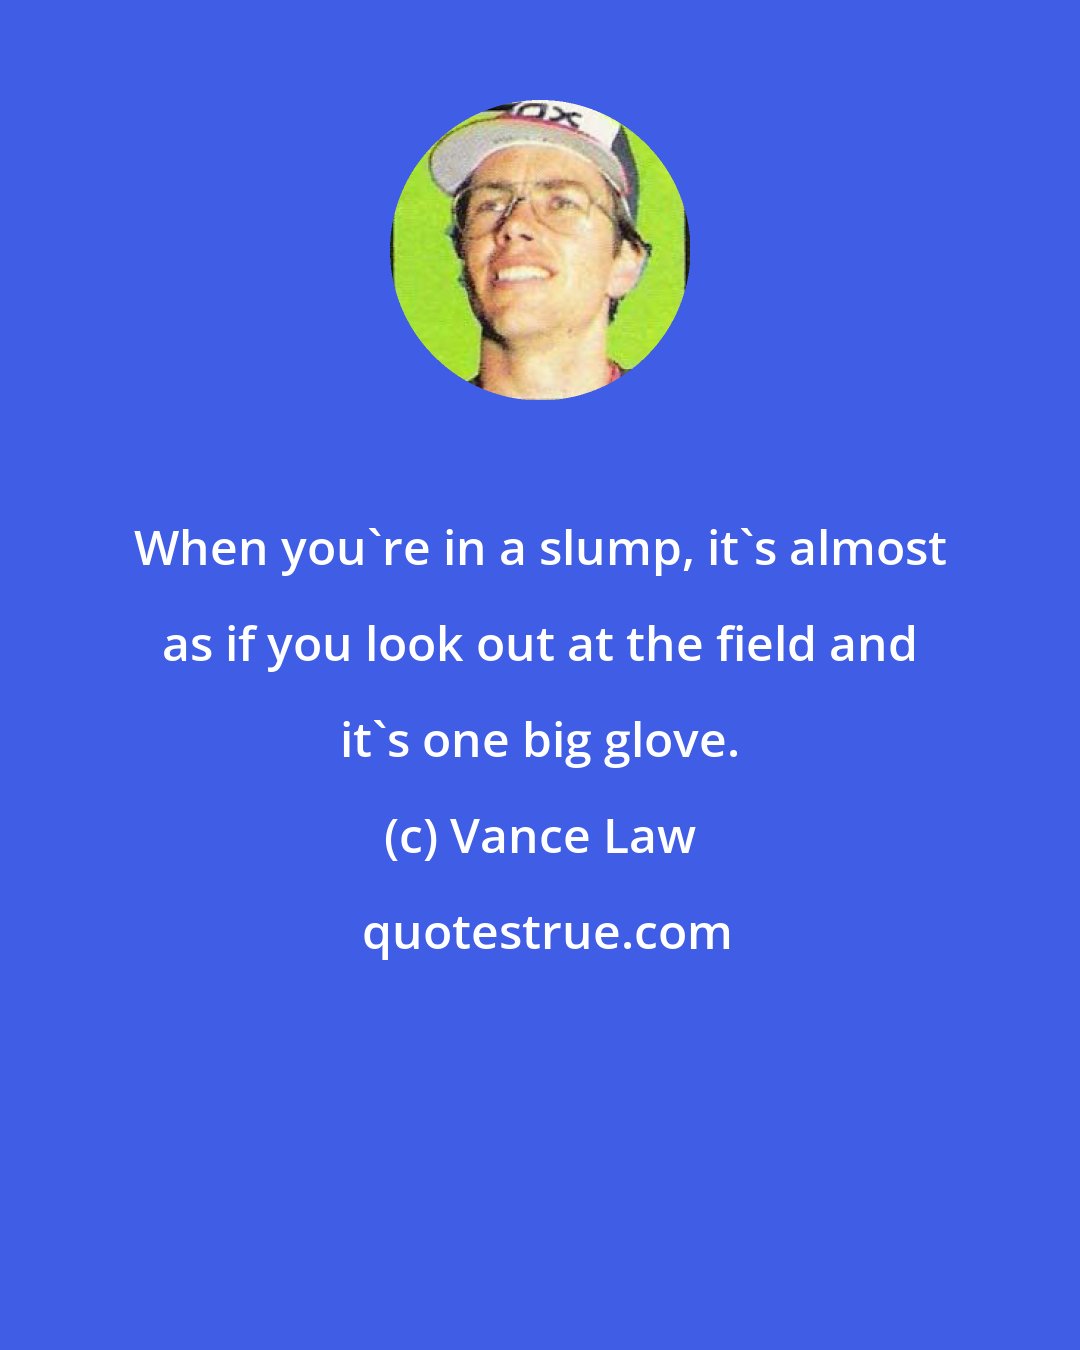 Vance Law: When you're in a slump, it's almost as if you look out at the field and it's one big glove.